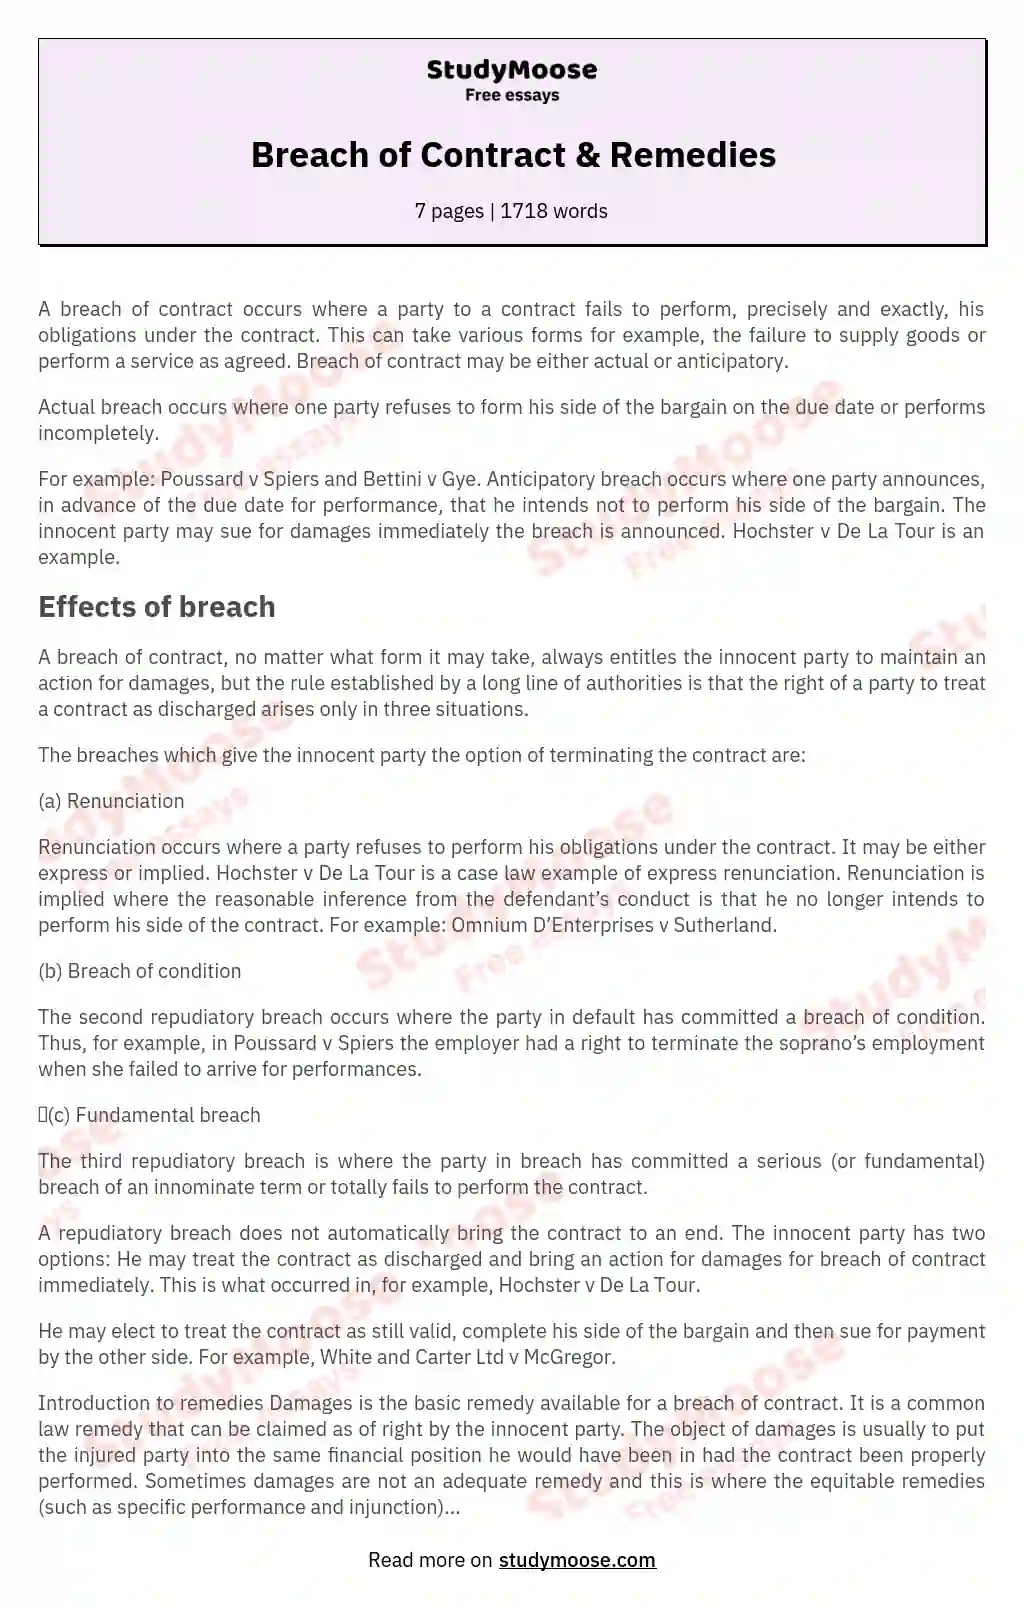 Breach of Contract & Remedies essay